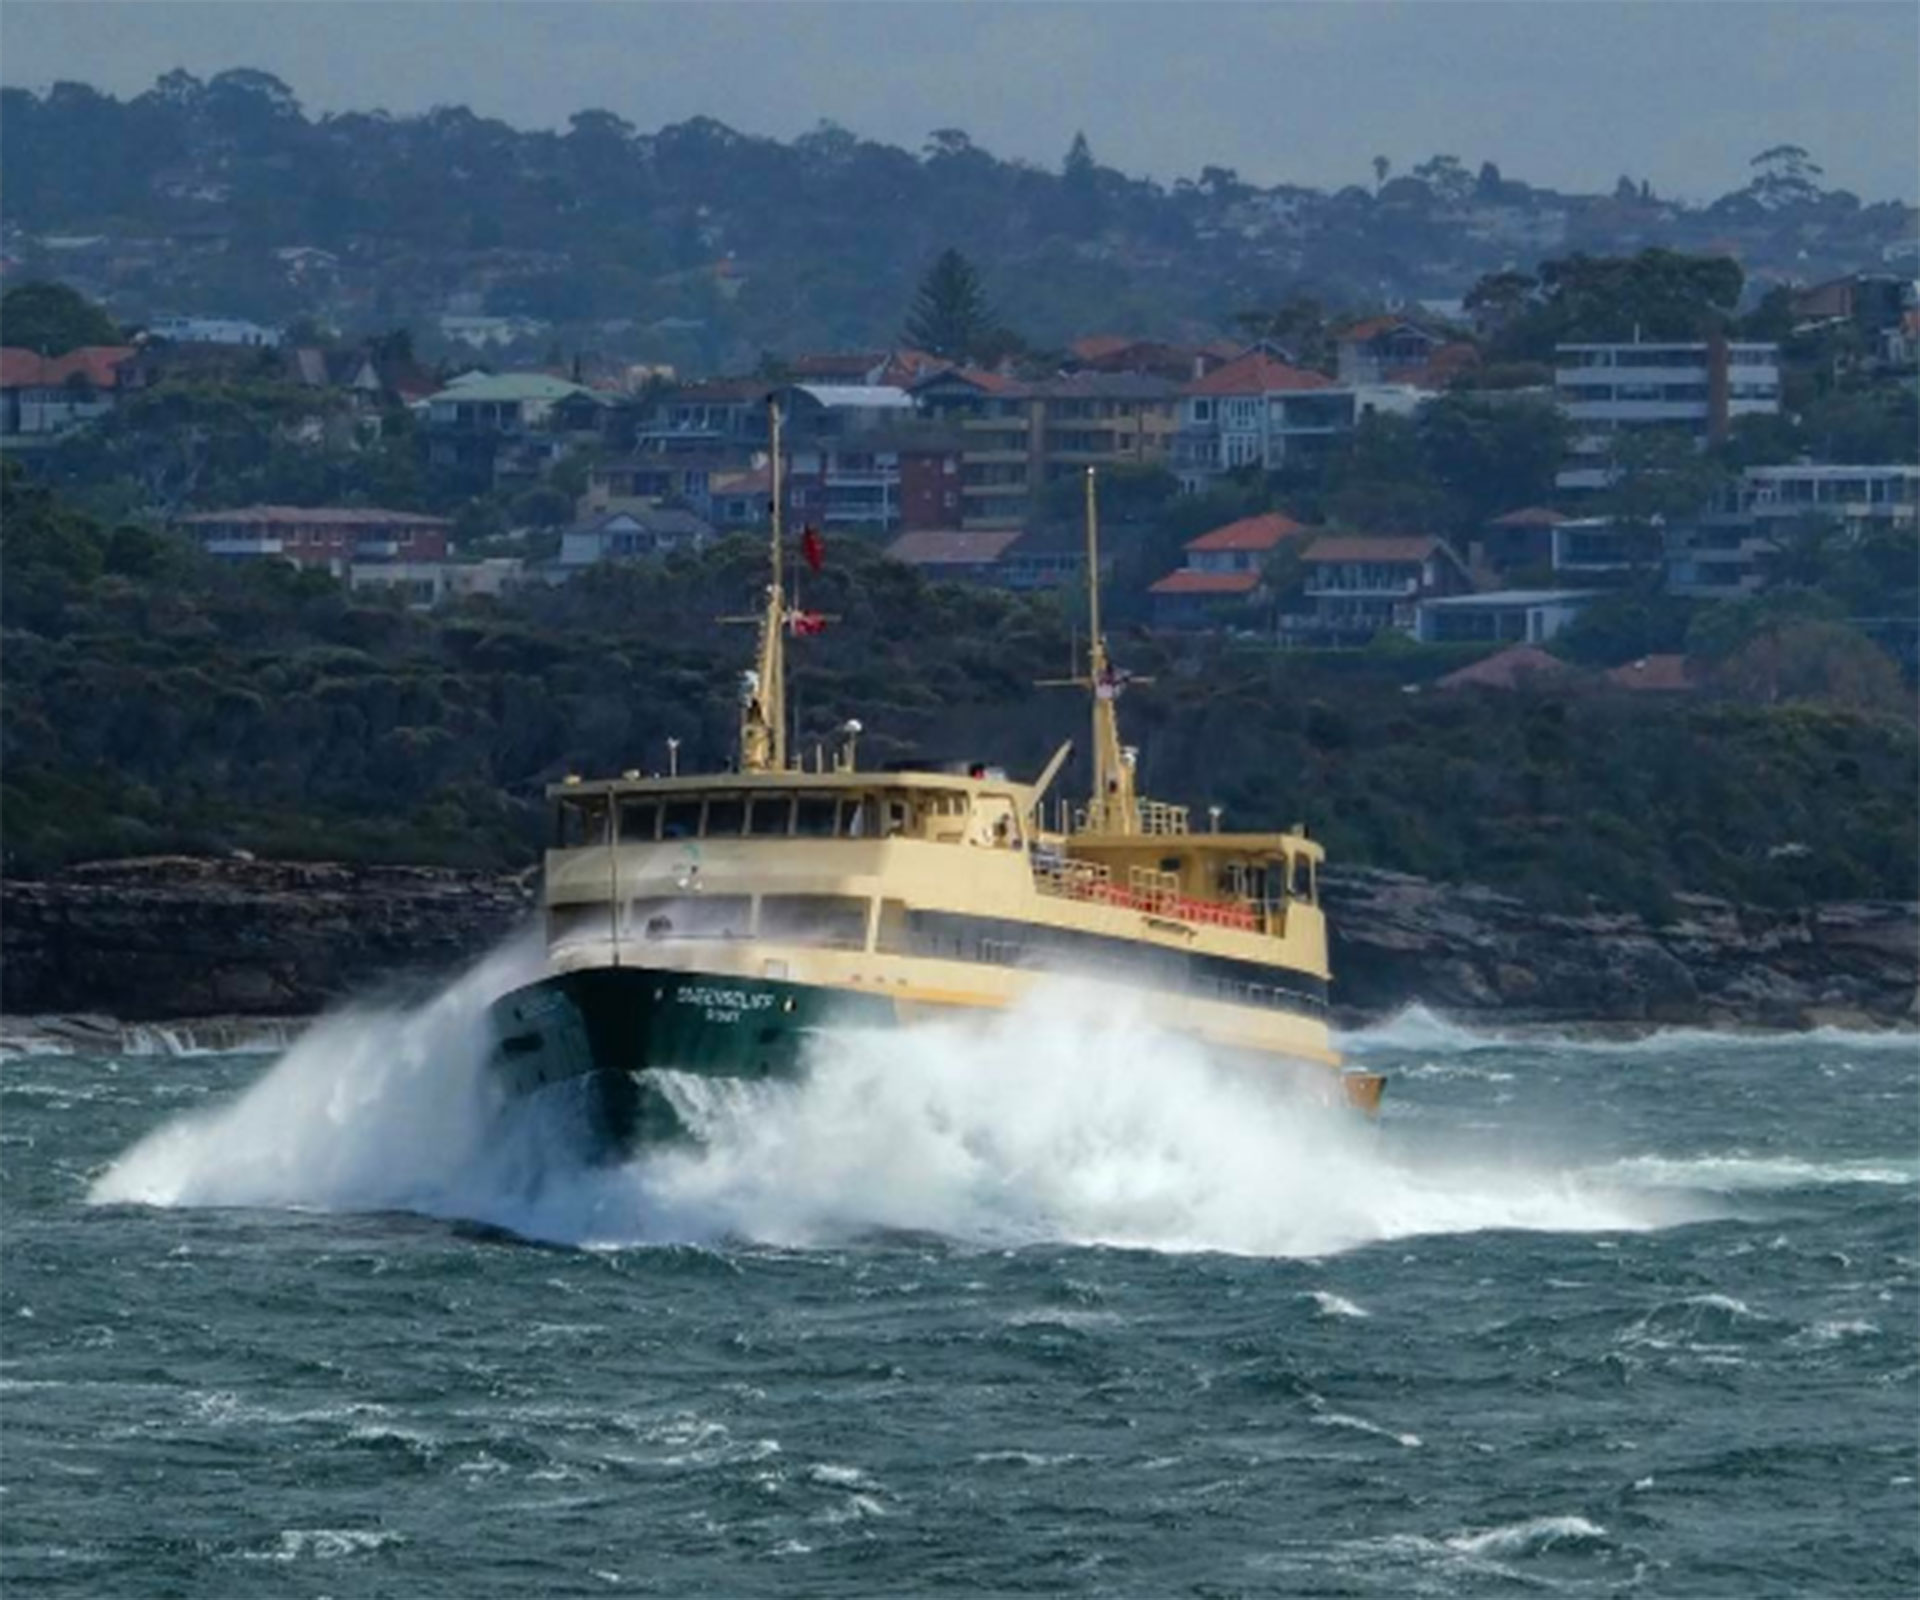 Sydney deckhand captures incredible image of gigantic waves crashing into the Manly ferry